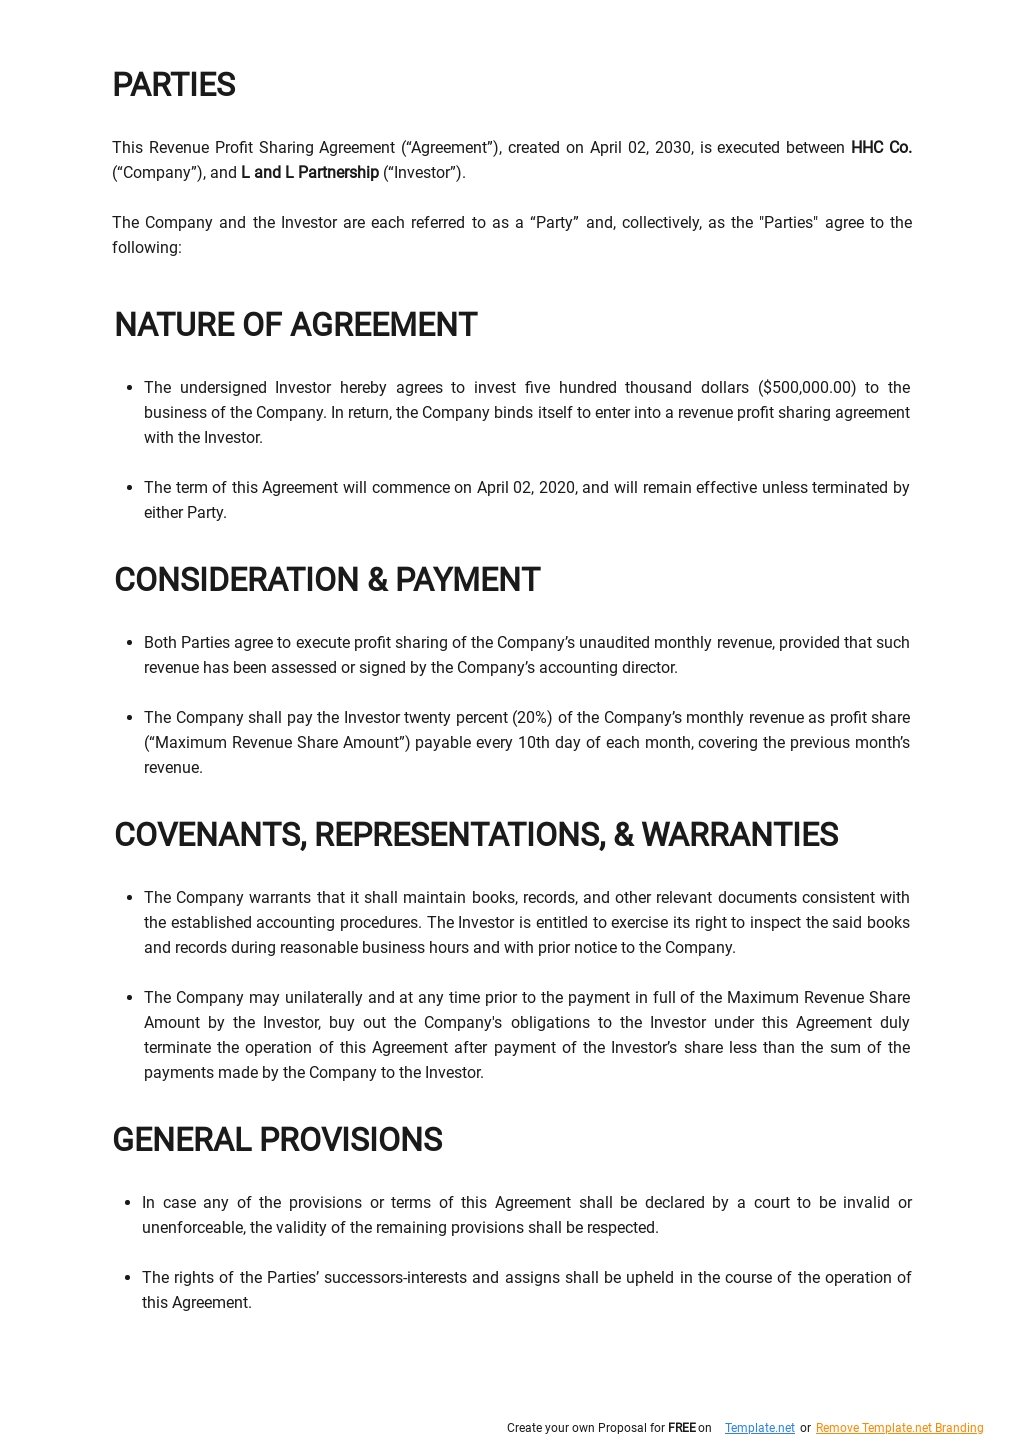 Revenue Profit Sharing Agreement Template in Google Docs Word